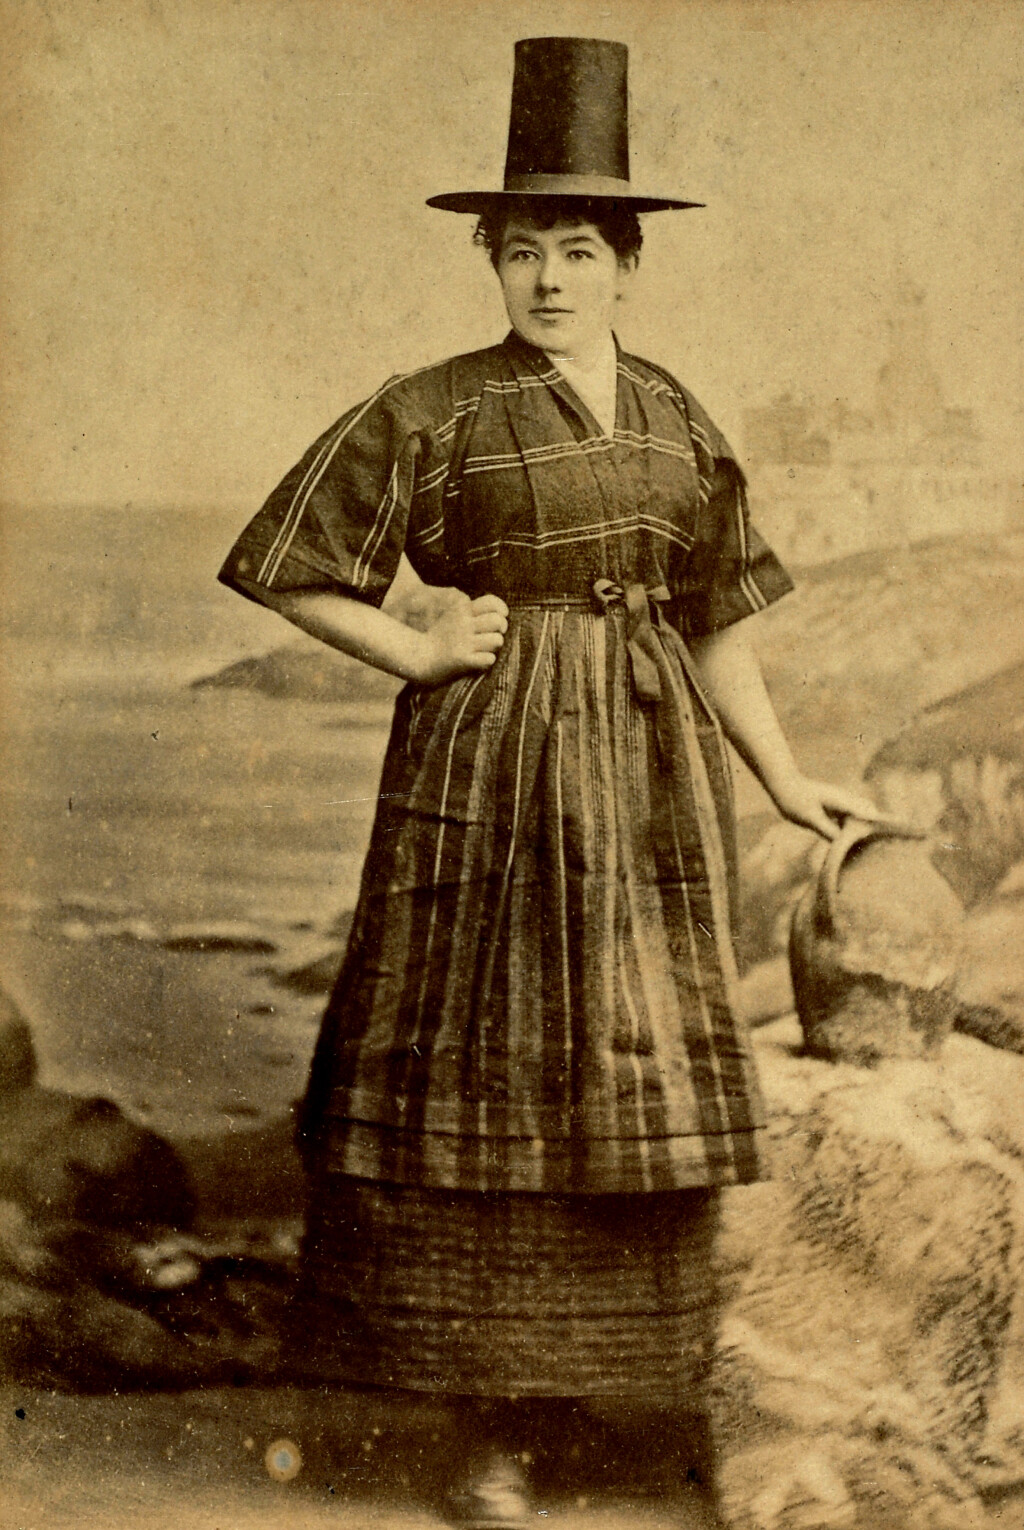 A sepia photograph of a woman wearing a tall Welsh hat, standing against a background of a coastal scene, with one hand on her hip and the other resting on a basket.